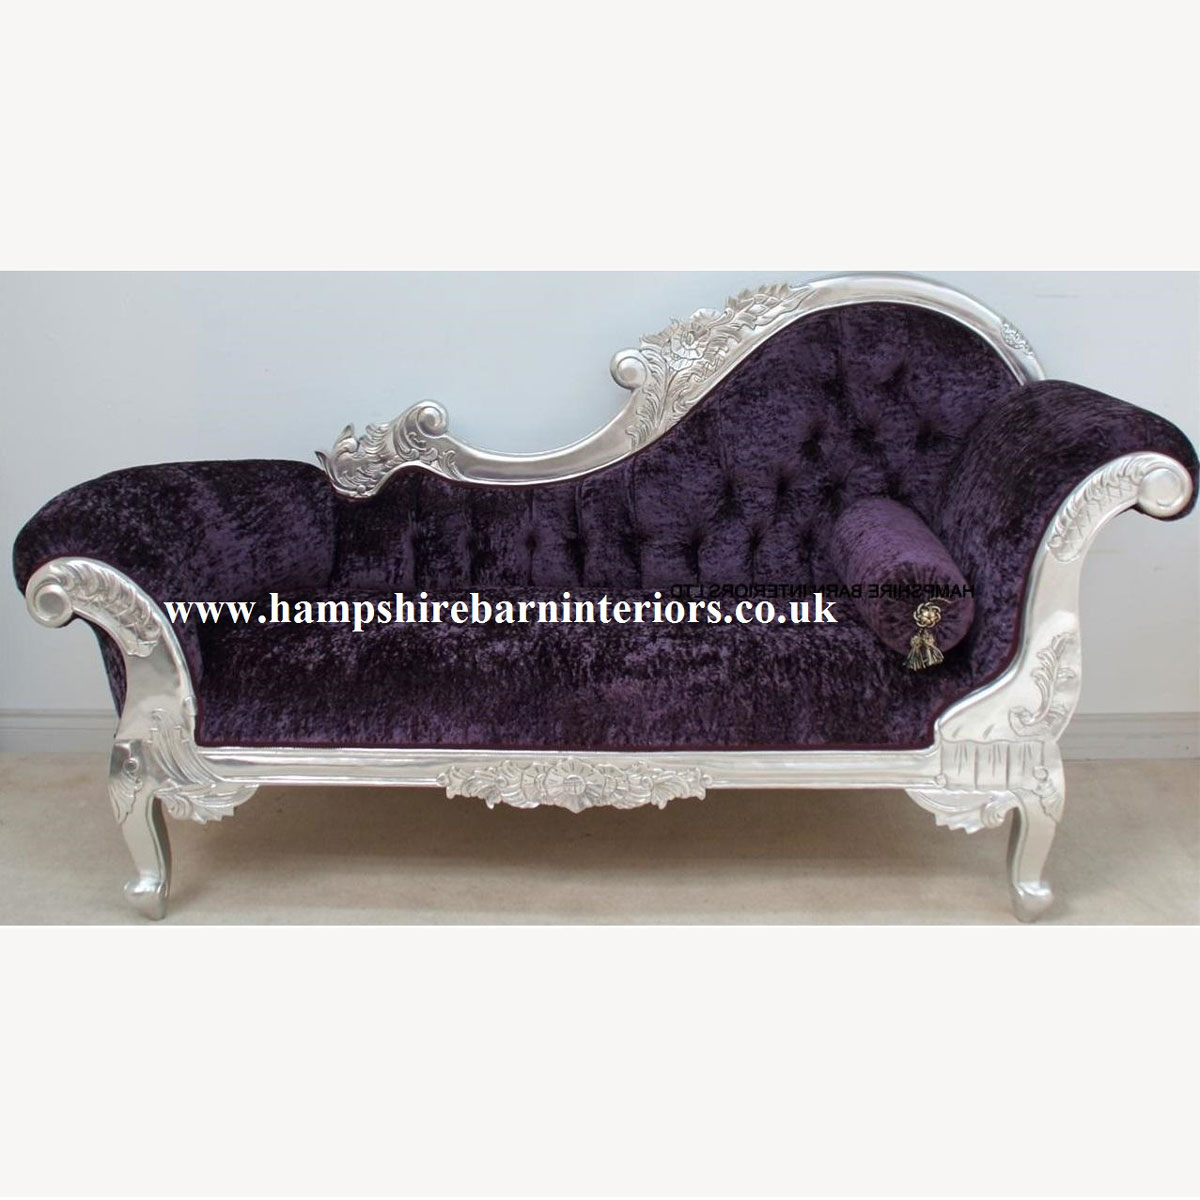 Beautiful Silver Leaf And Purple Crushed Velvet Designers Chaise 1 - Hampshire Barn Interiors - Beautiful Silver Leaf And Purple Crushed Velvet Designers Chaise -